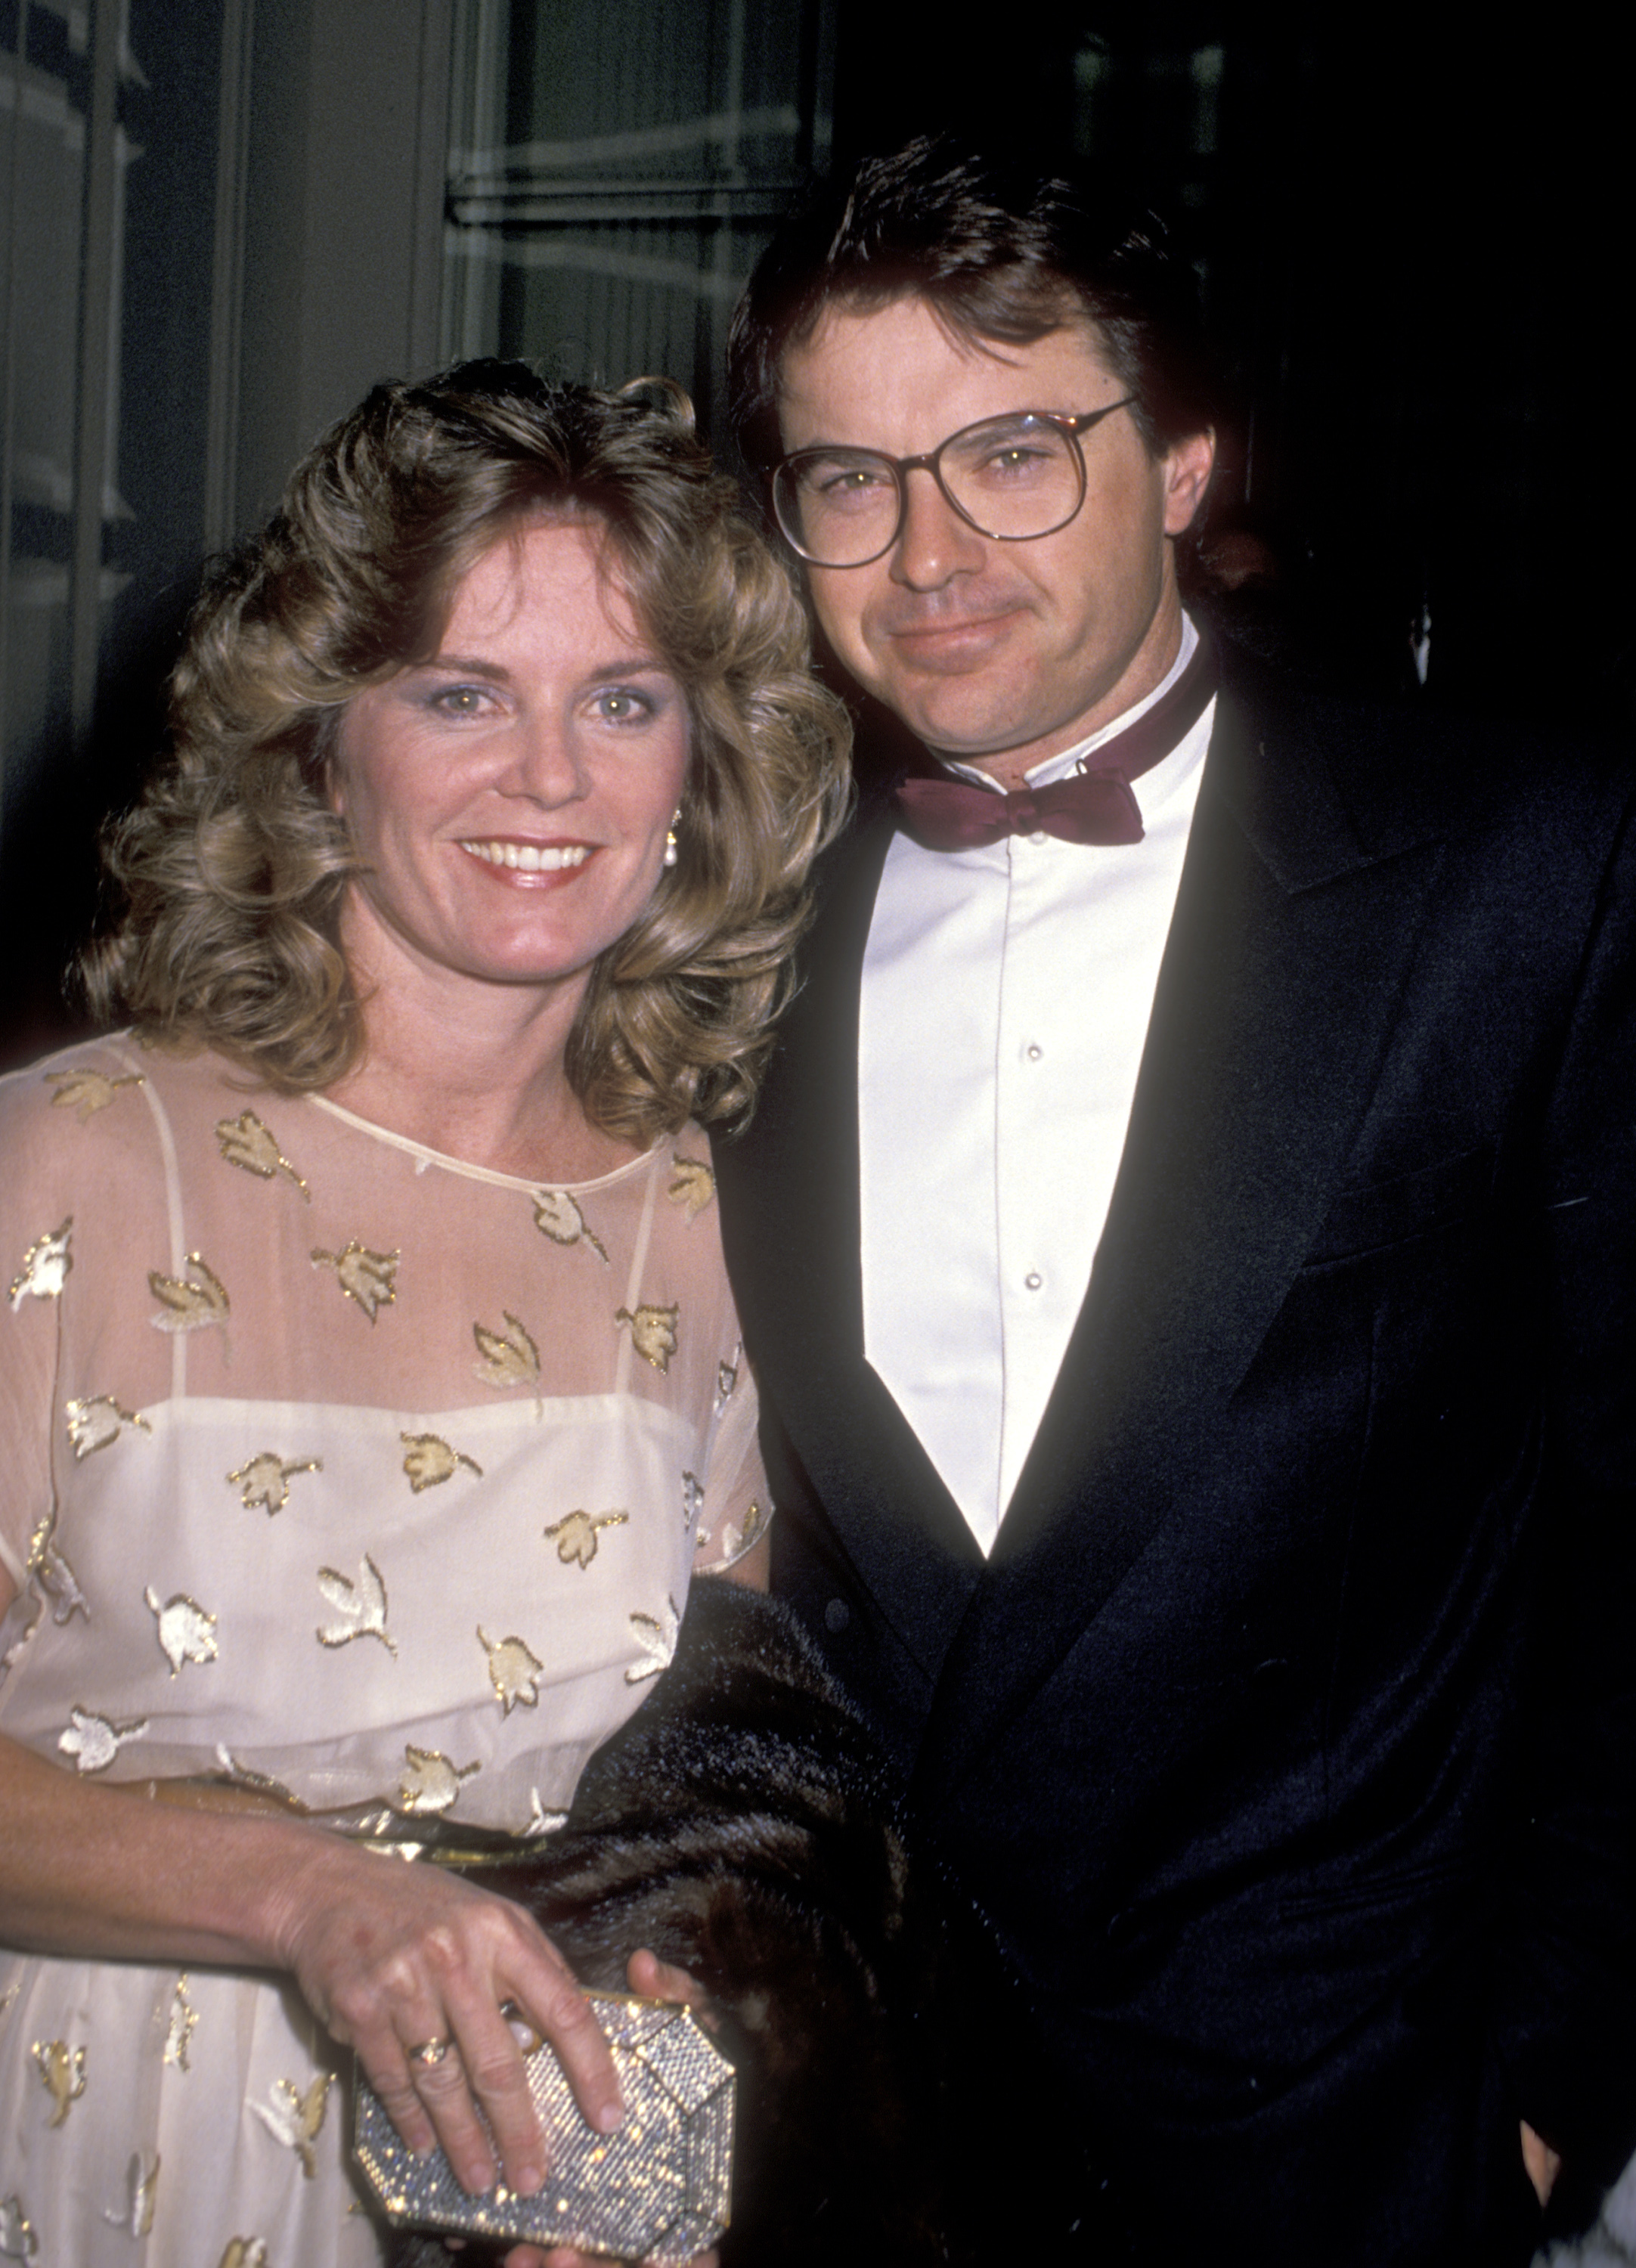 Heather Menzies and Robert Urich at The Tel Aviv Foundation Gala Honoring Robert Wise on January 21, 1989, in Beverly Hills, California | Source: Getty Images